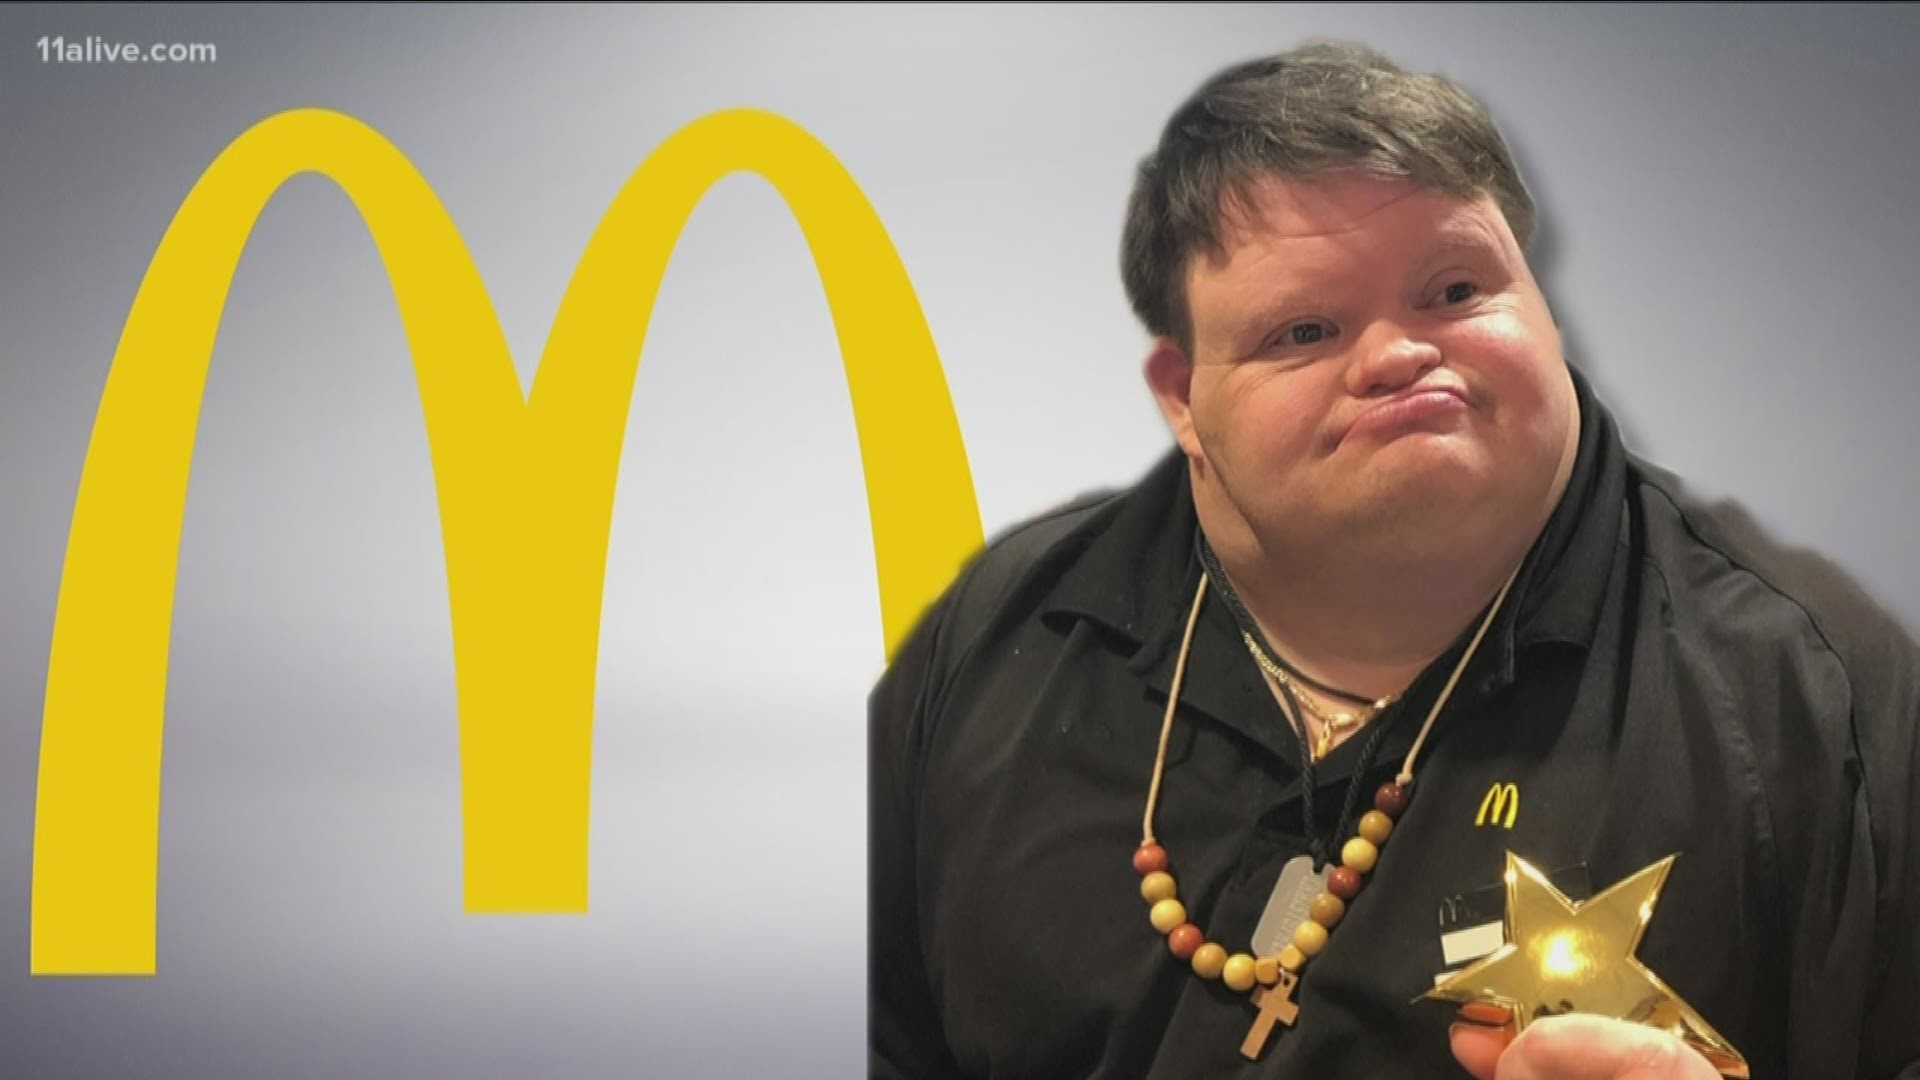 Chris Campbell, who worked at a McDonald's on Buford Highway, passed away on Tuesday morning.